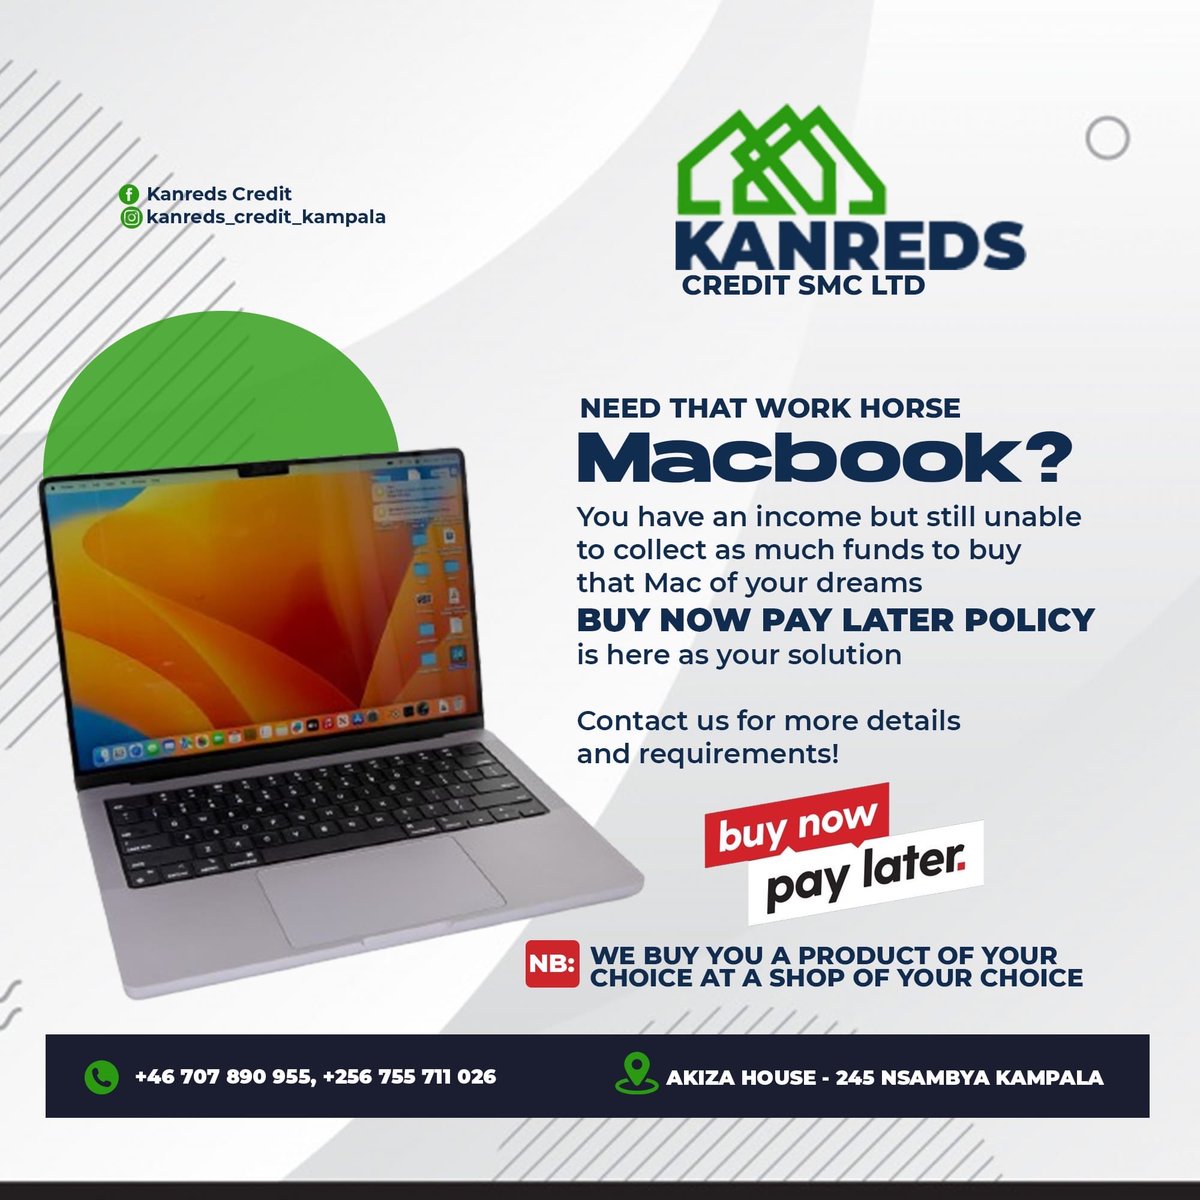 I'm considering purchasing a new MacBook laptop with #KanredsCredit's pay later policy. You can also buy anything you want on credit and pay later.😉